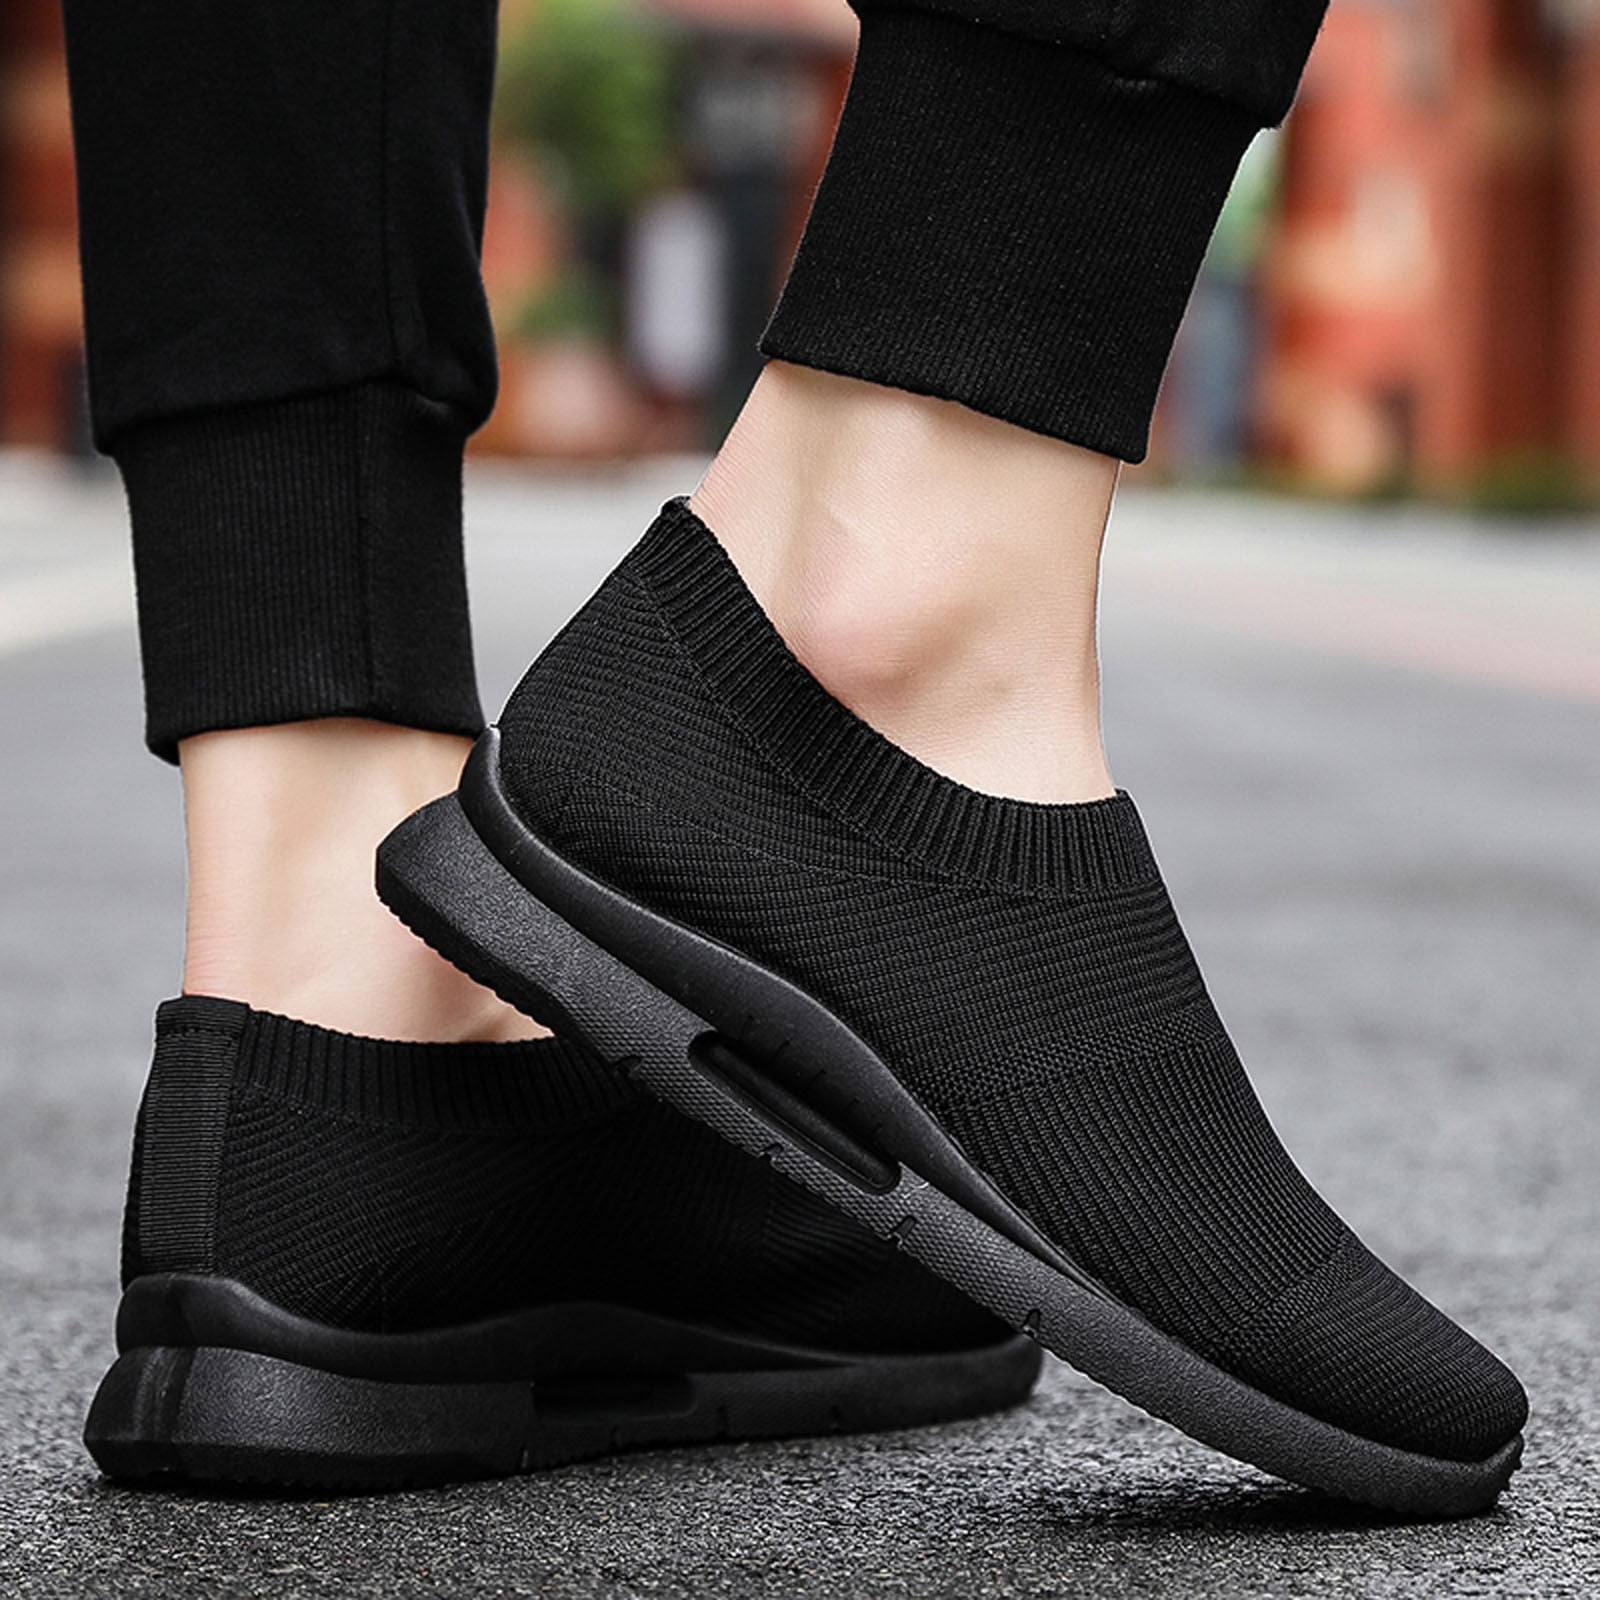 Ladies Women's Slip On Trainers Gym Sports Comfy Sock Sneakers Mesh Shoes 5-8.5 